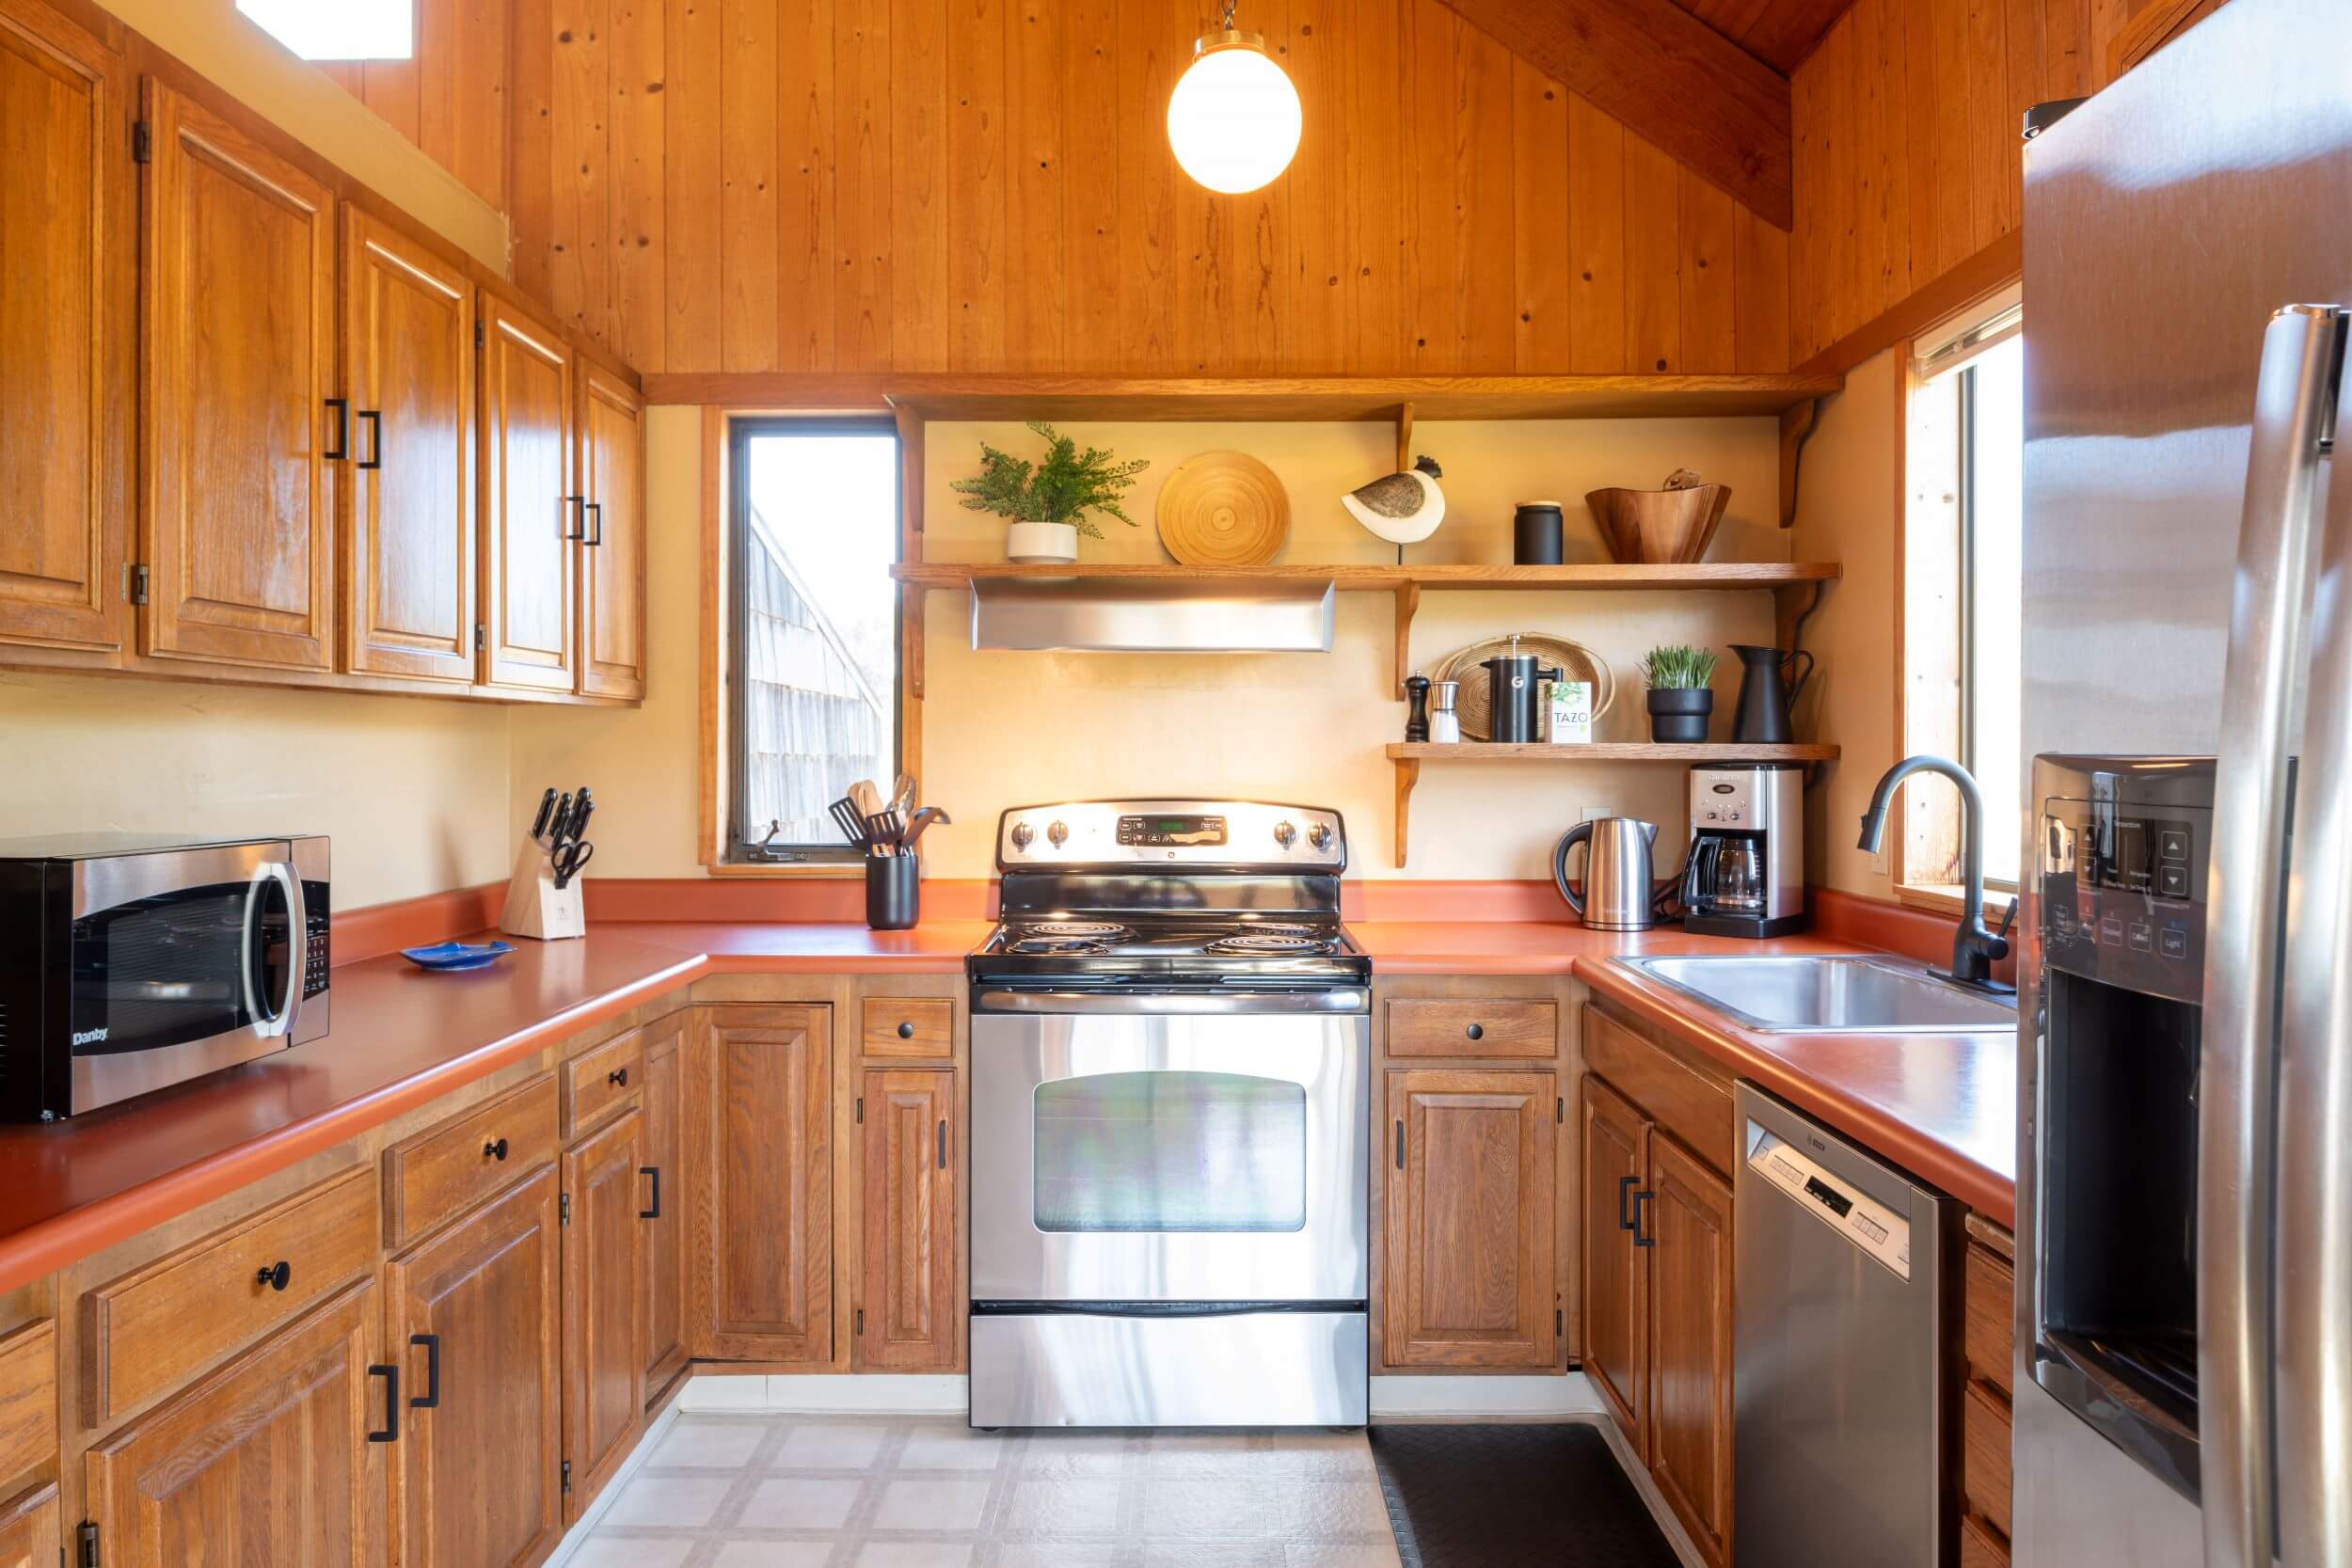 Sea Meadow: bright kitchen with wood walls and cabinets.